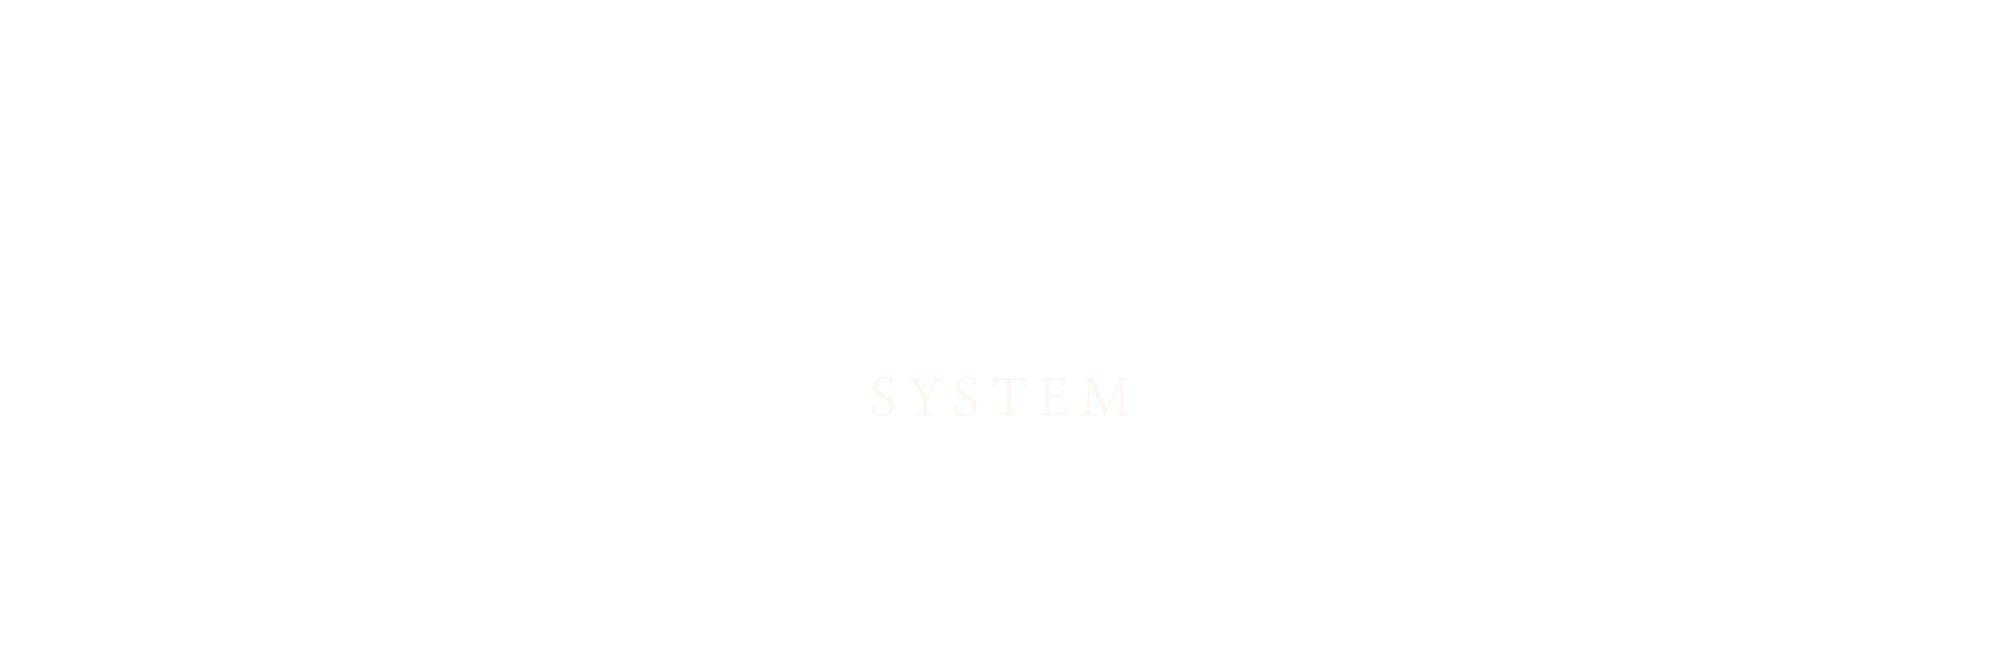 Time’s One SYSTEM